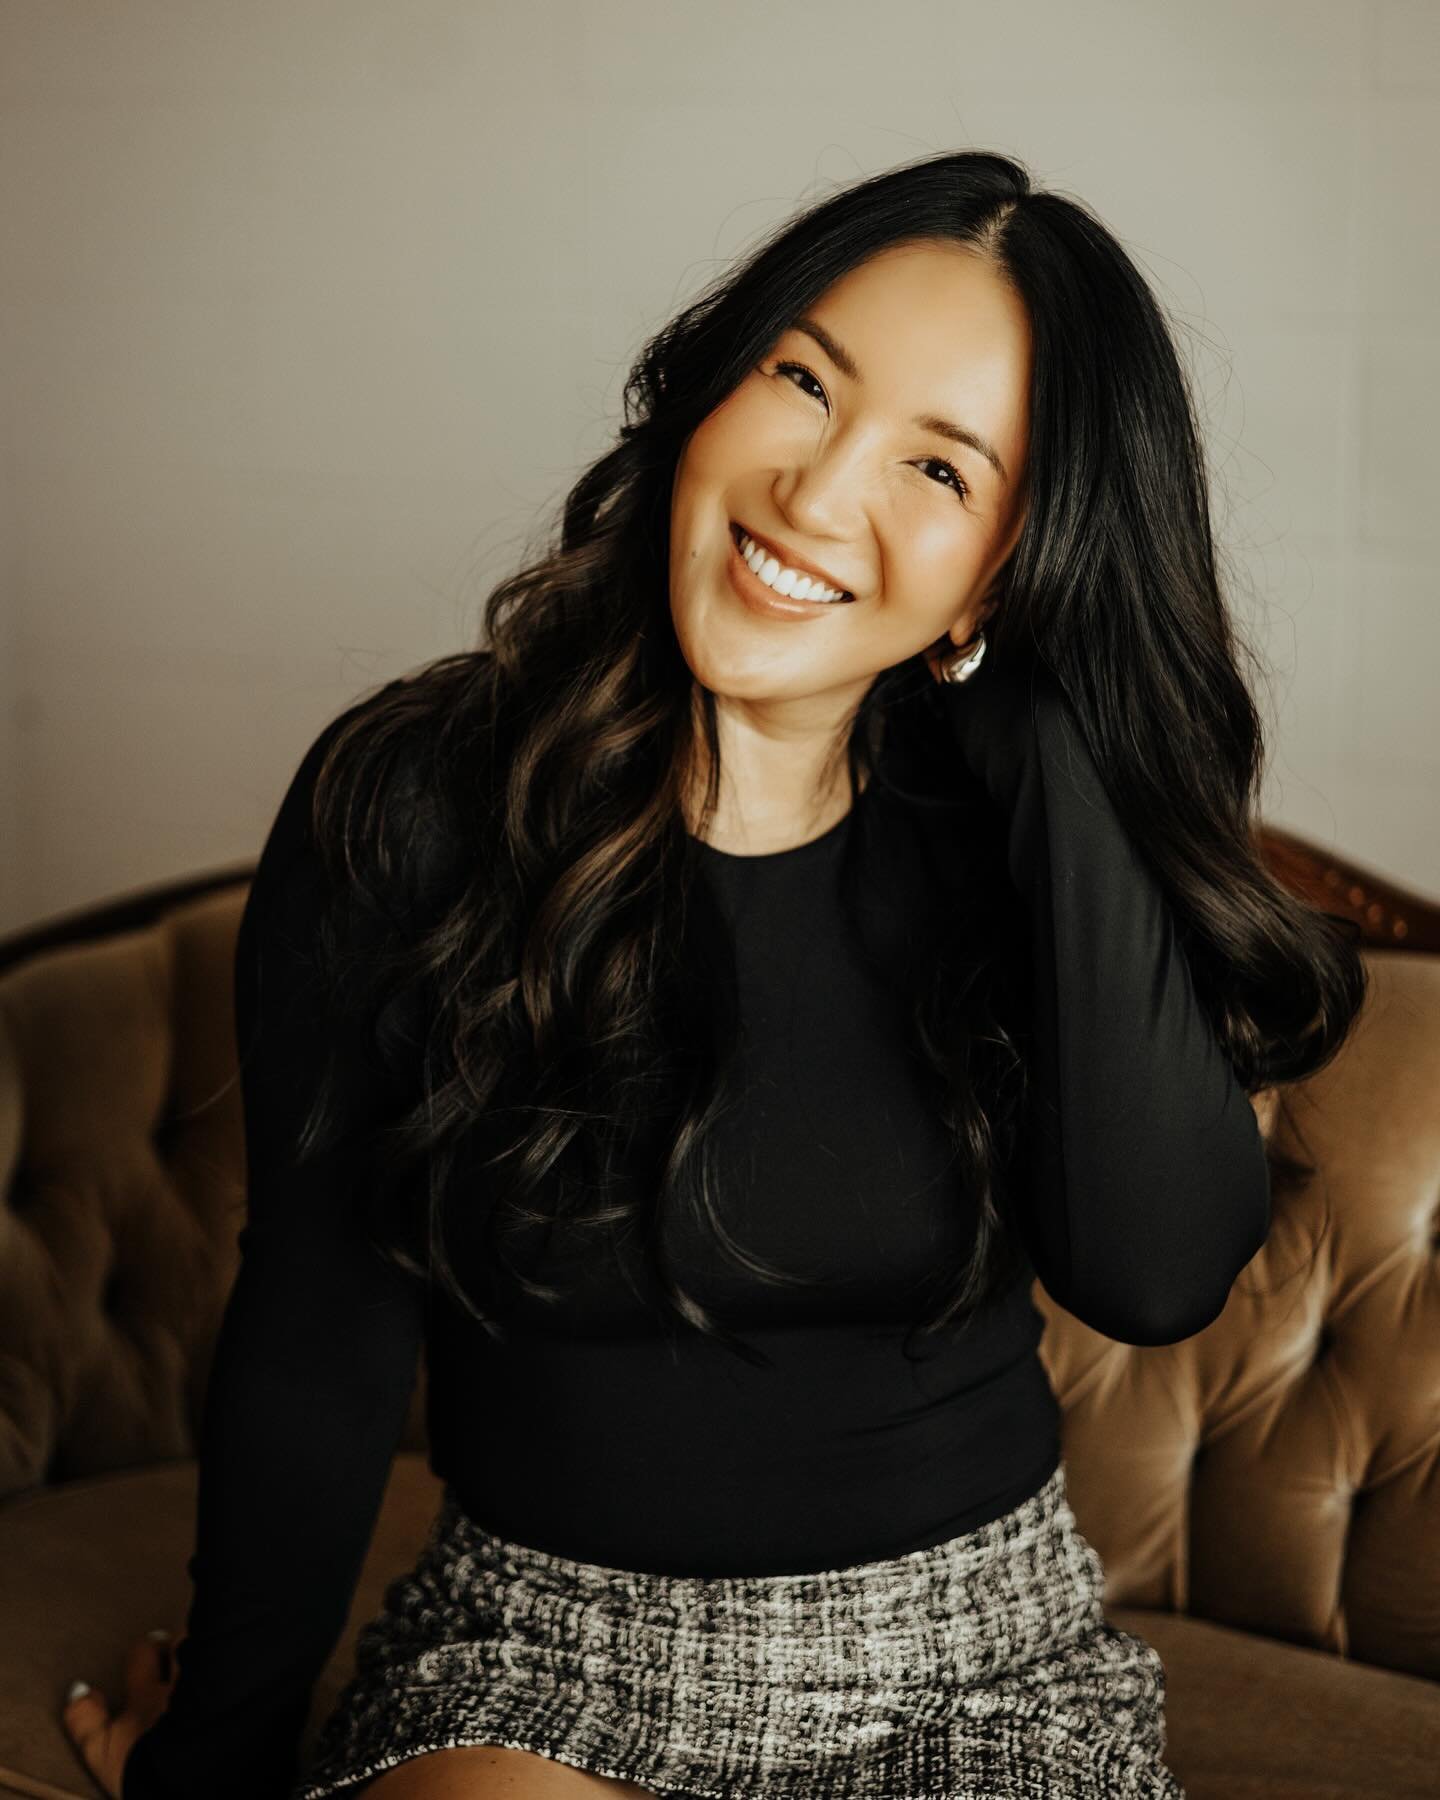 I had this absolute stunner in the studio for some updated headshots recently. Hyun is an extremely talented realtor, check her out! @concierge.realty @hyun_min.b